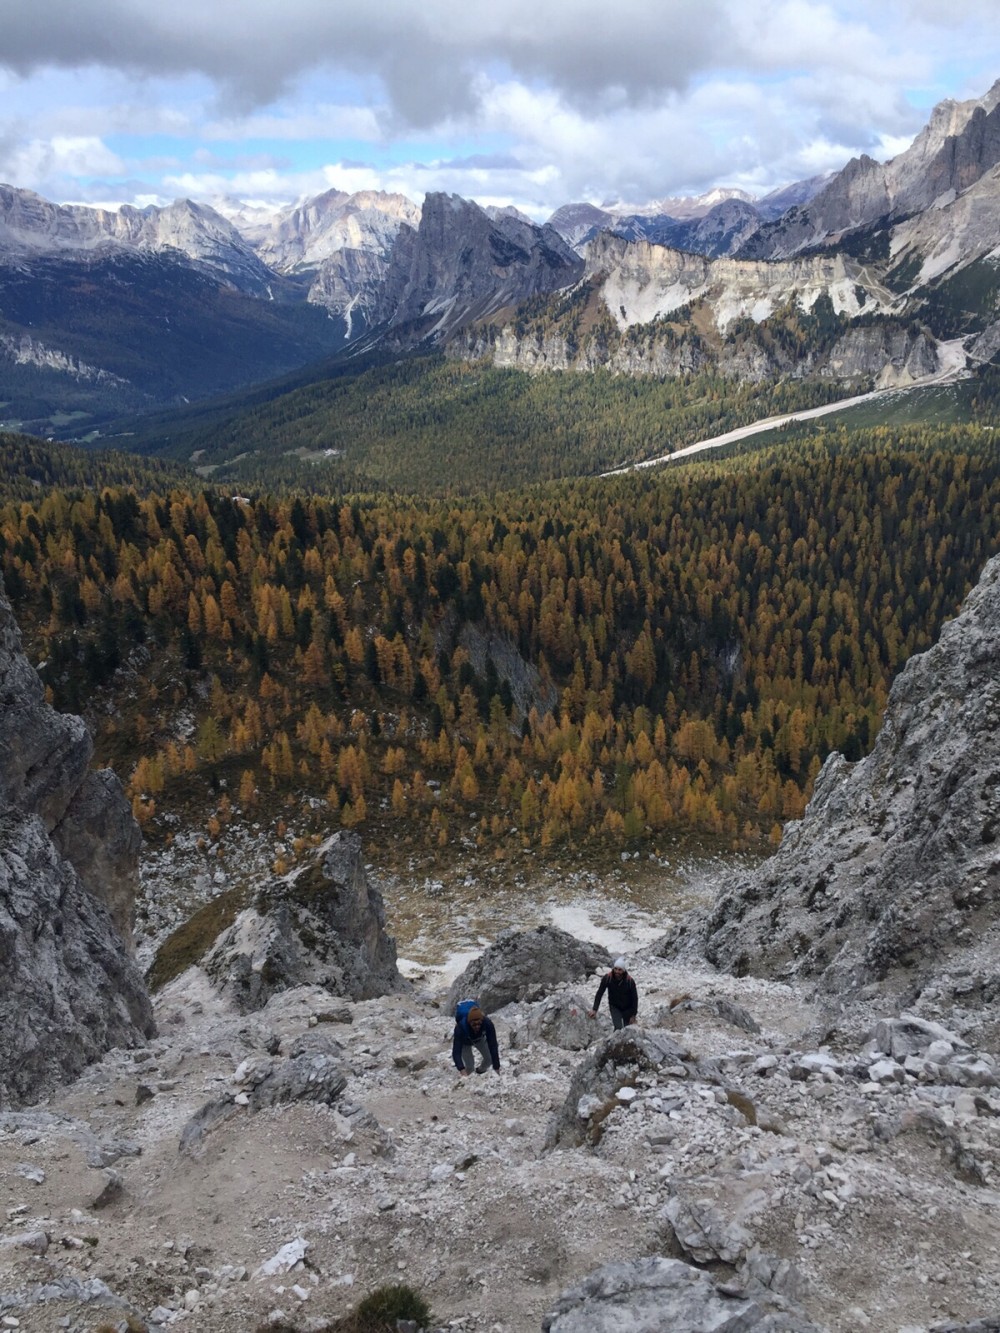 dolomites from the top